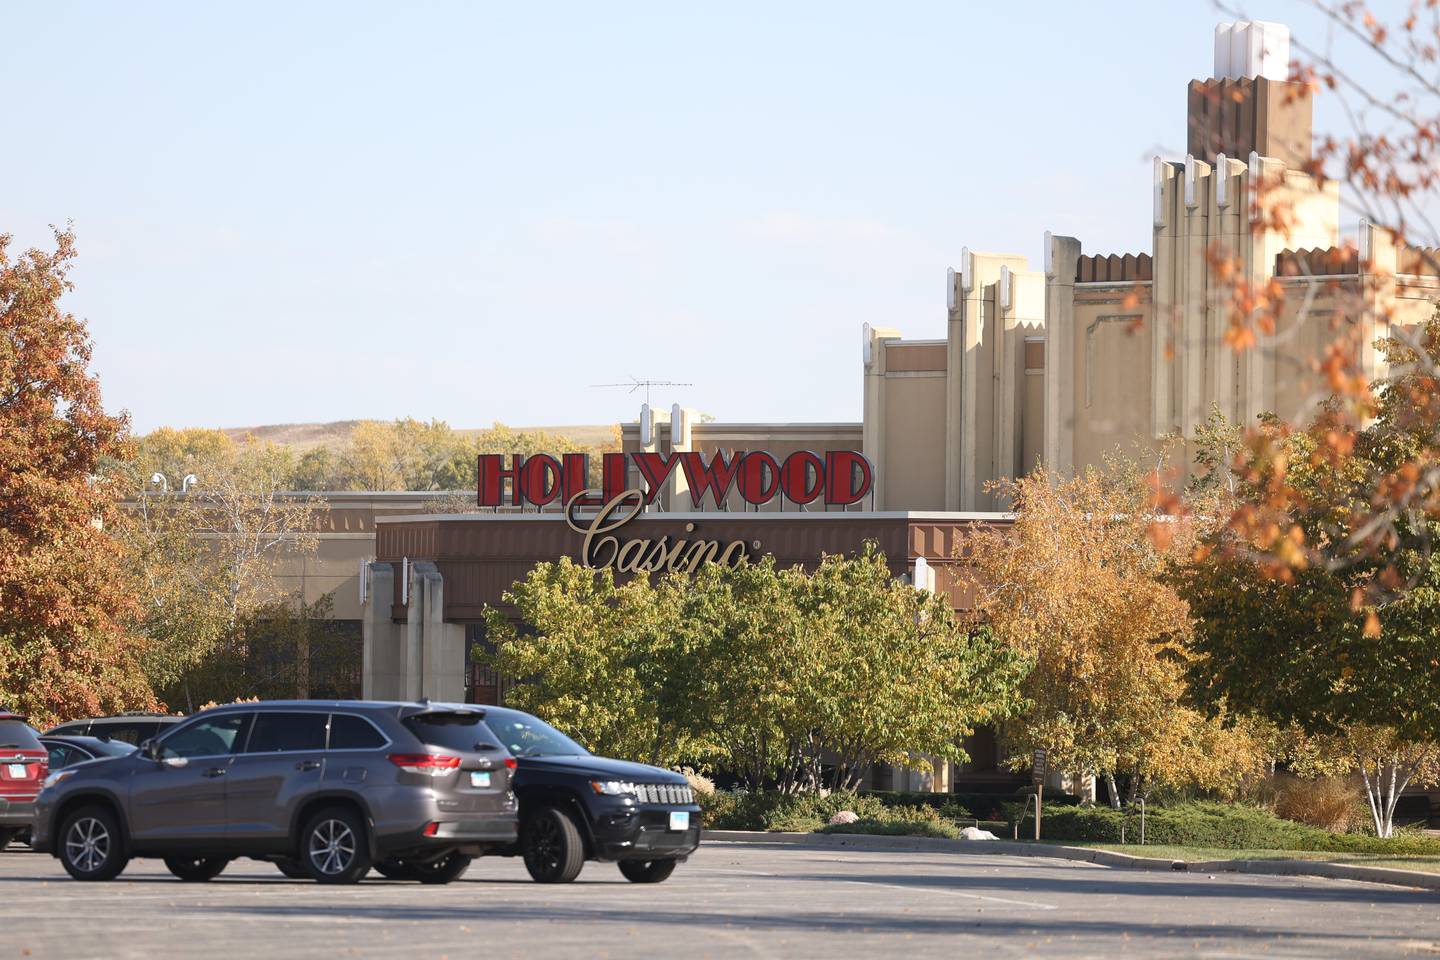 Penn Entertainment Inc. announced on Monday that it will relocate the Joliet Hollywood Casino to Rock Run Crossings development near the I-80 and I-55 interchange.